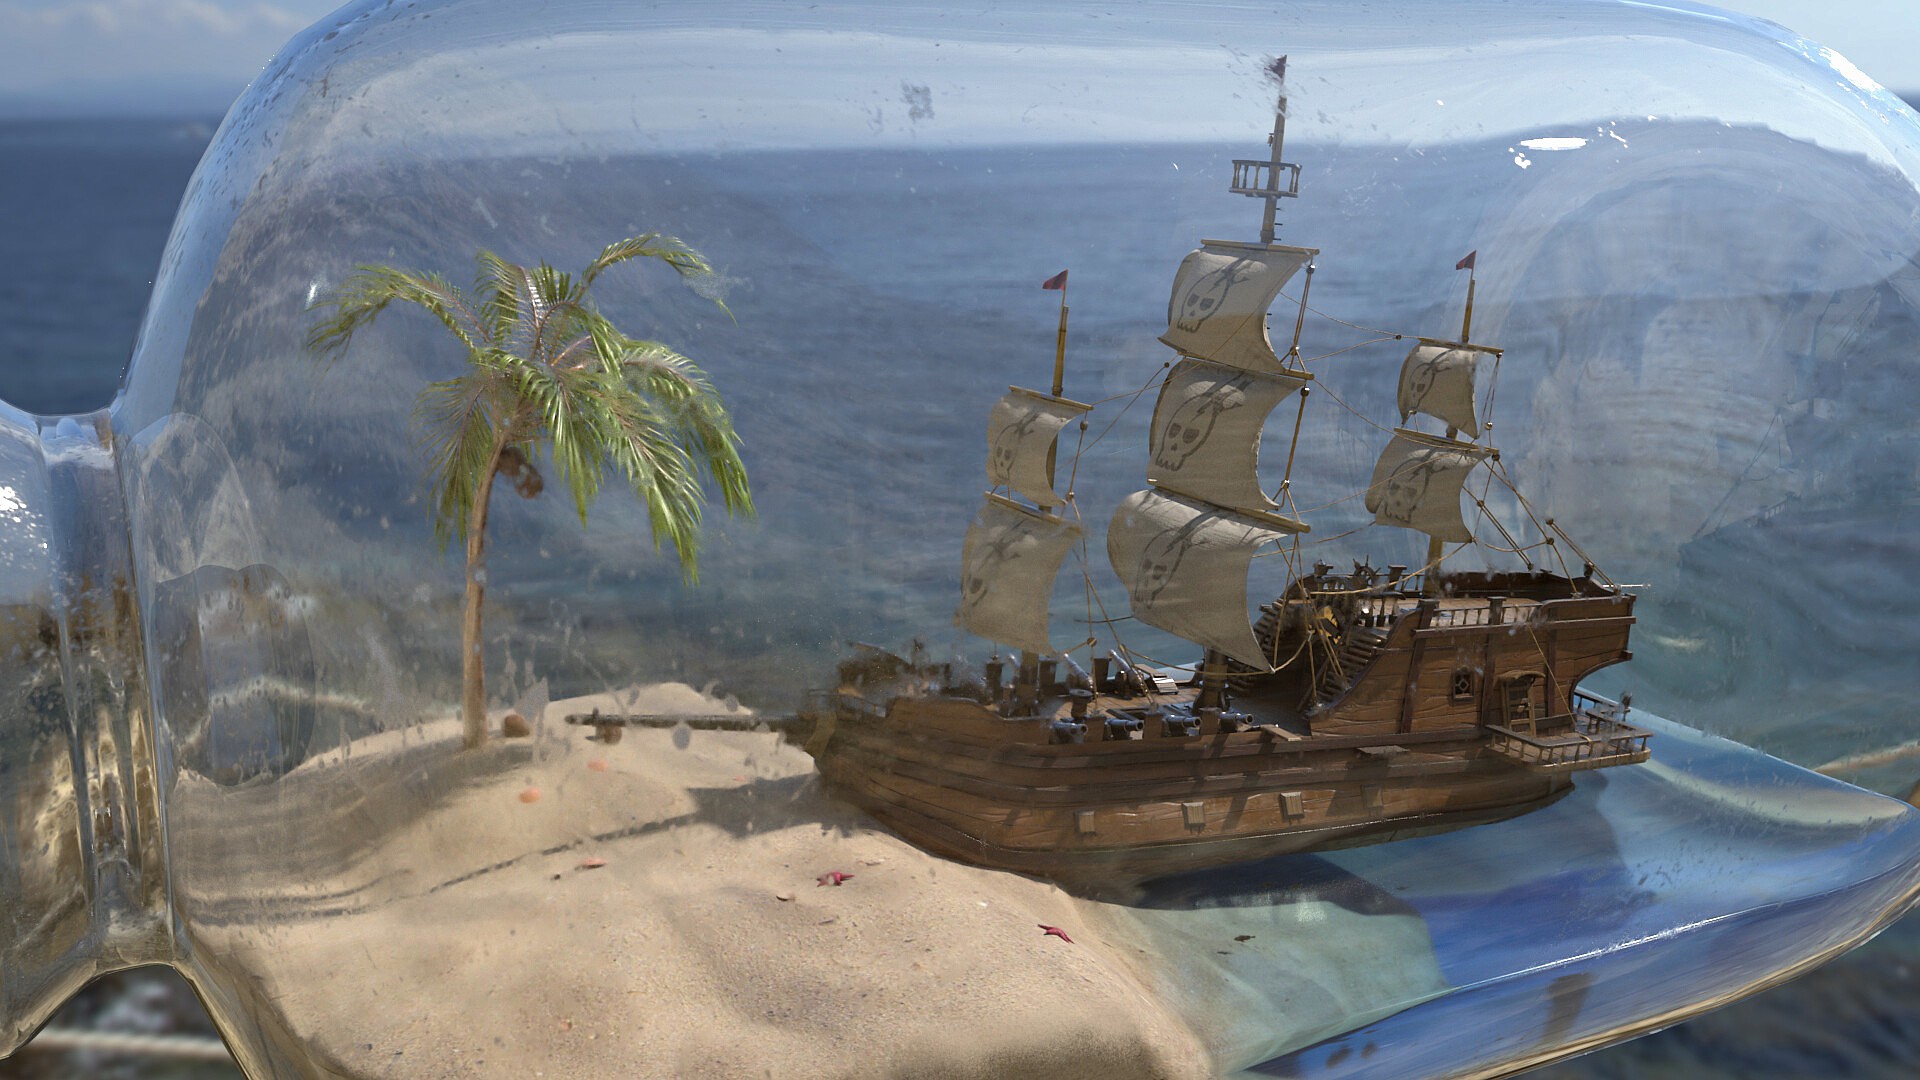 Pirate Ship Coconuts Ship Water Bottles Sand Palm Trees 1920x1080